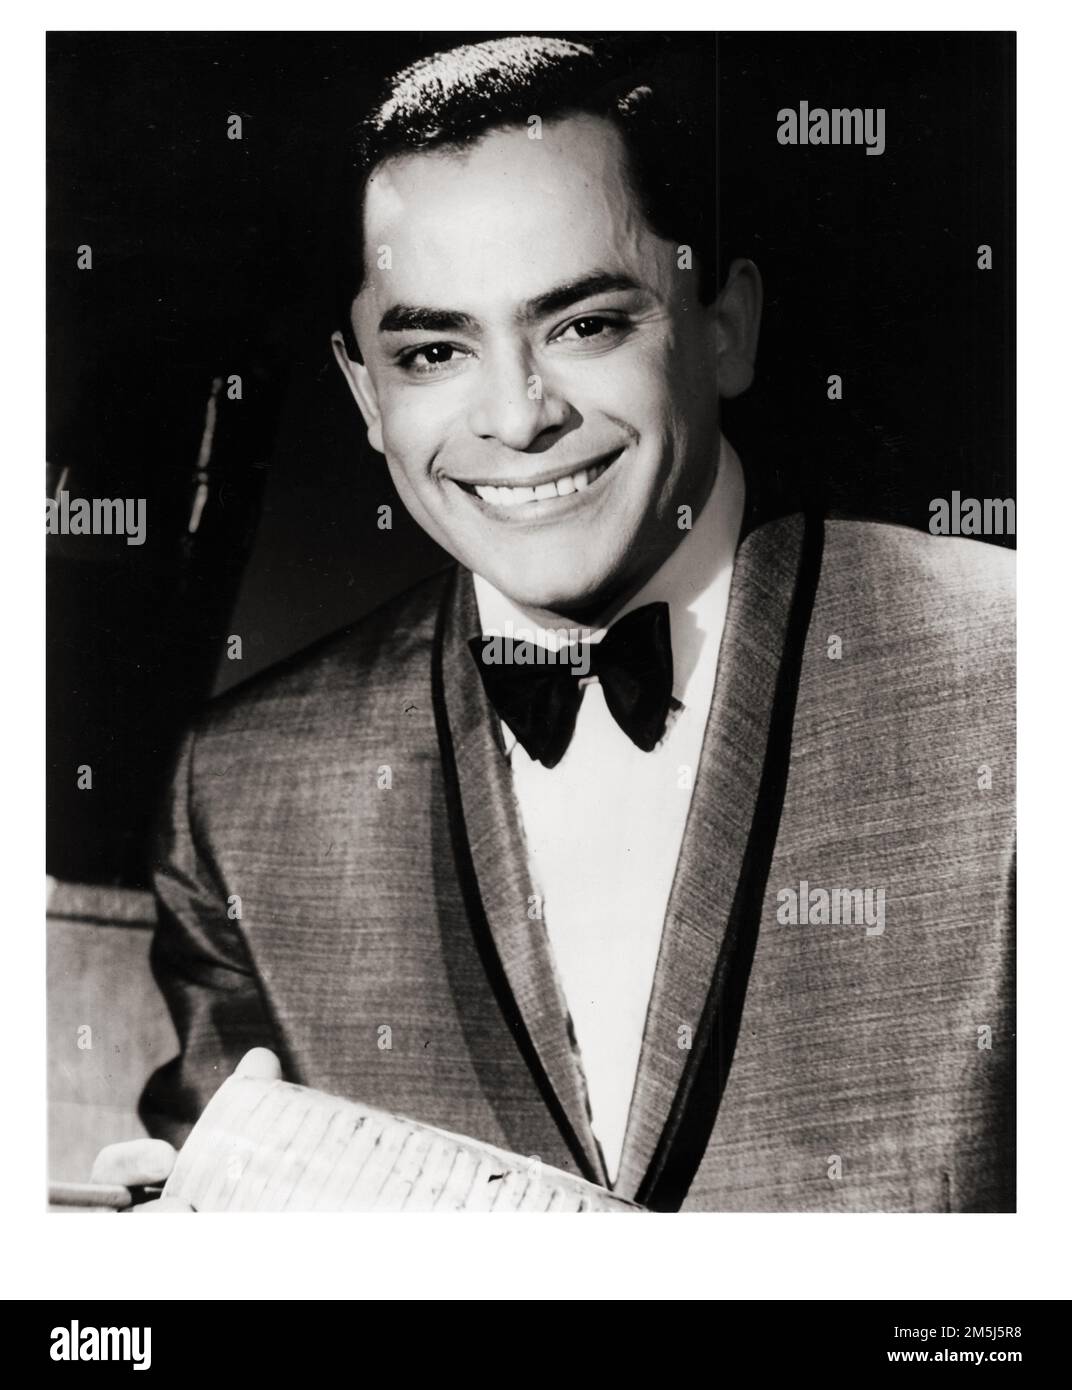 A publicity photo of Tito Rodiguez, a Puerto Rican singer and bandleader who was influential in popularizing Latin music, Latin jazz and Latin dance. Circa 1950s. Stock Photo